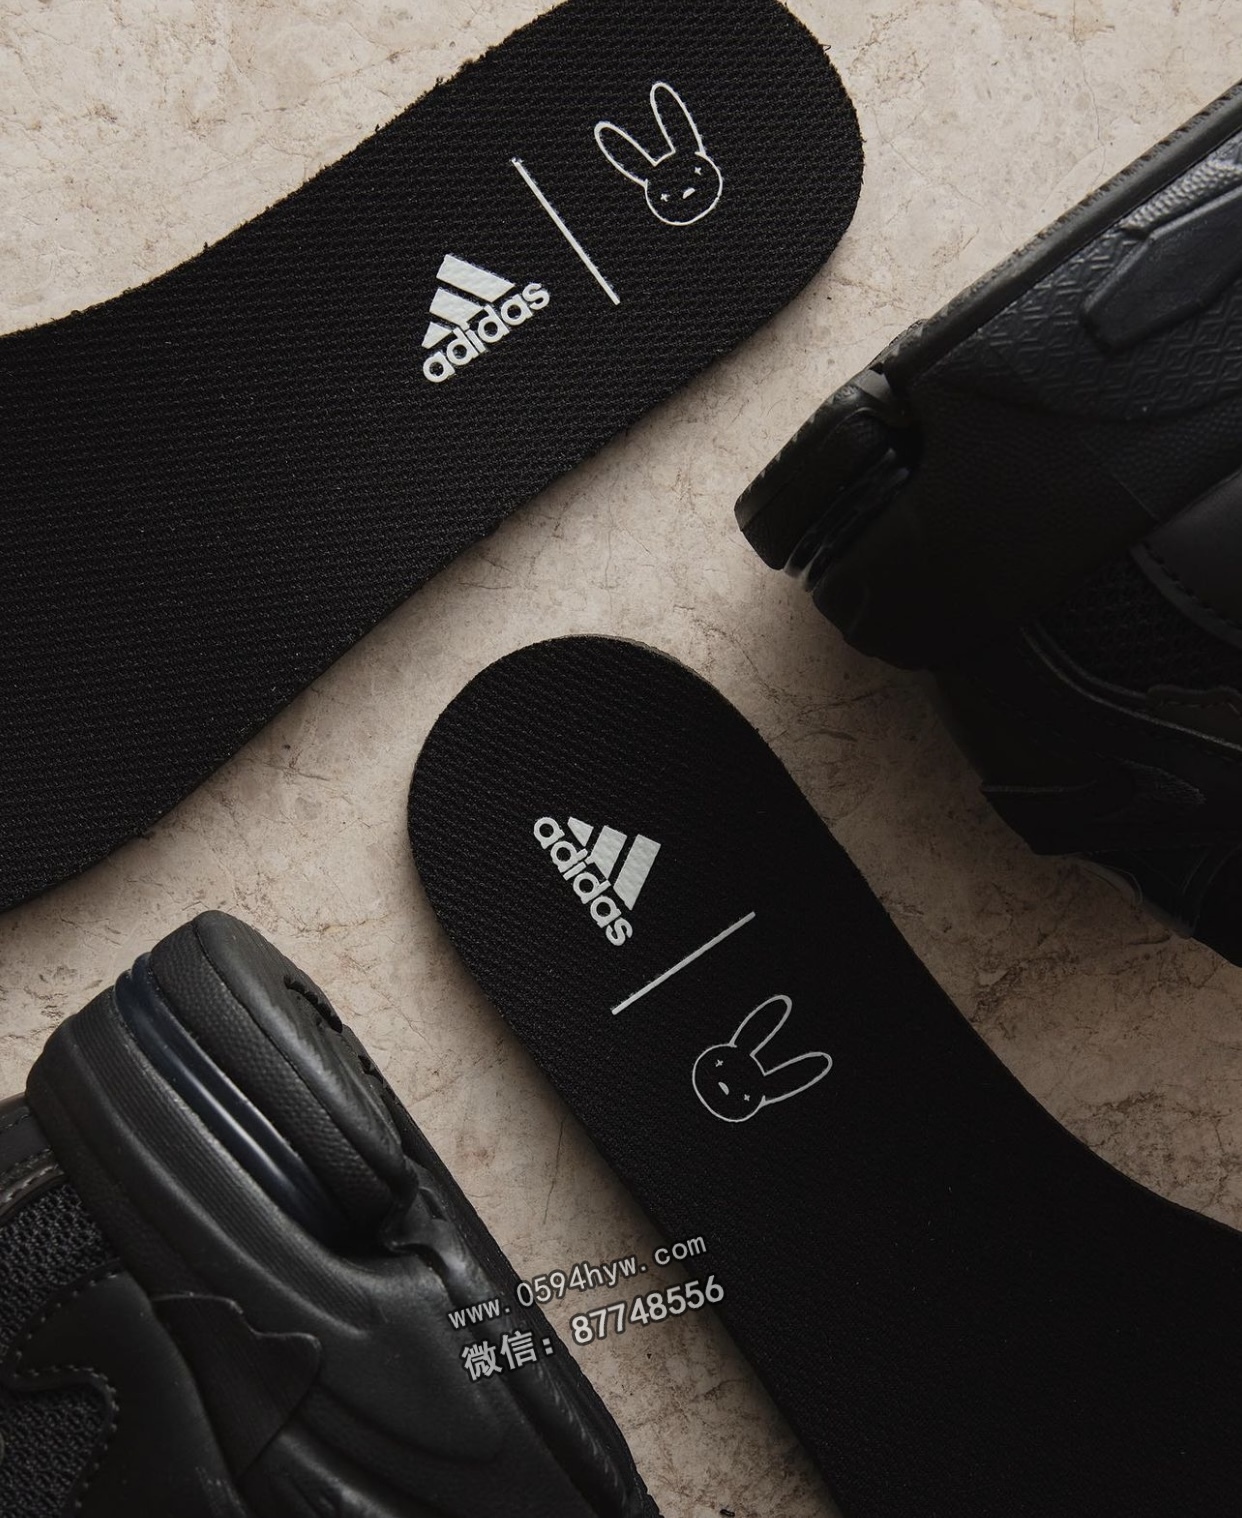 Bad-Bunny-adidas-Response-CL-Black-ID0805-Release-Date-9-1